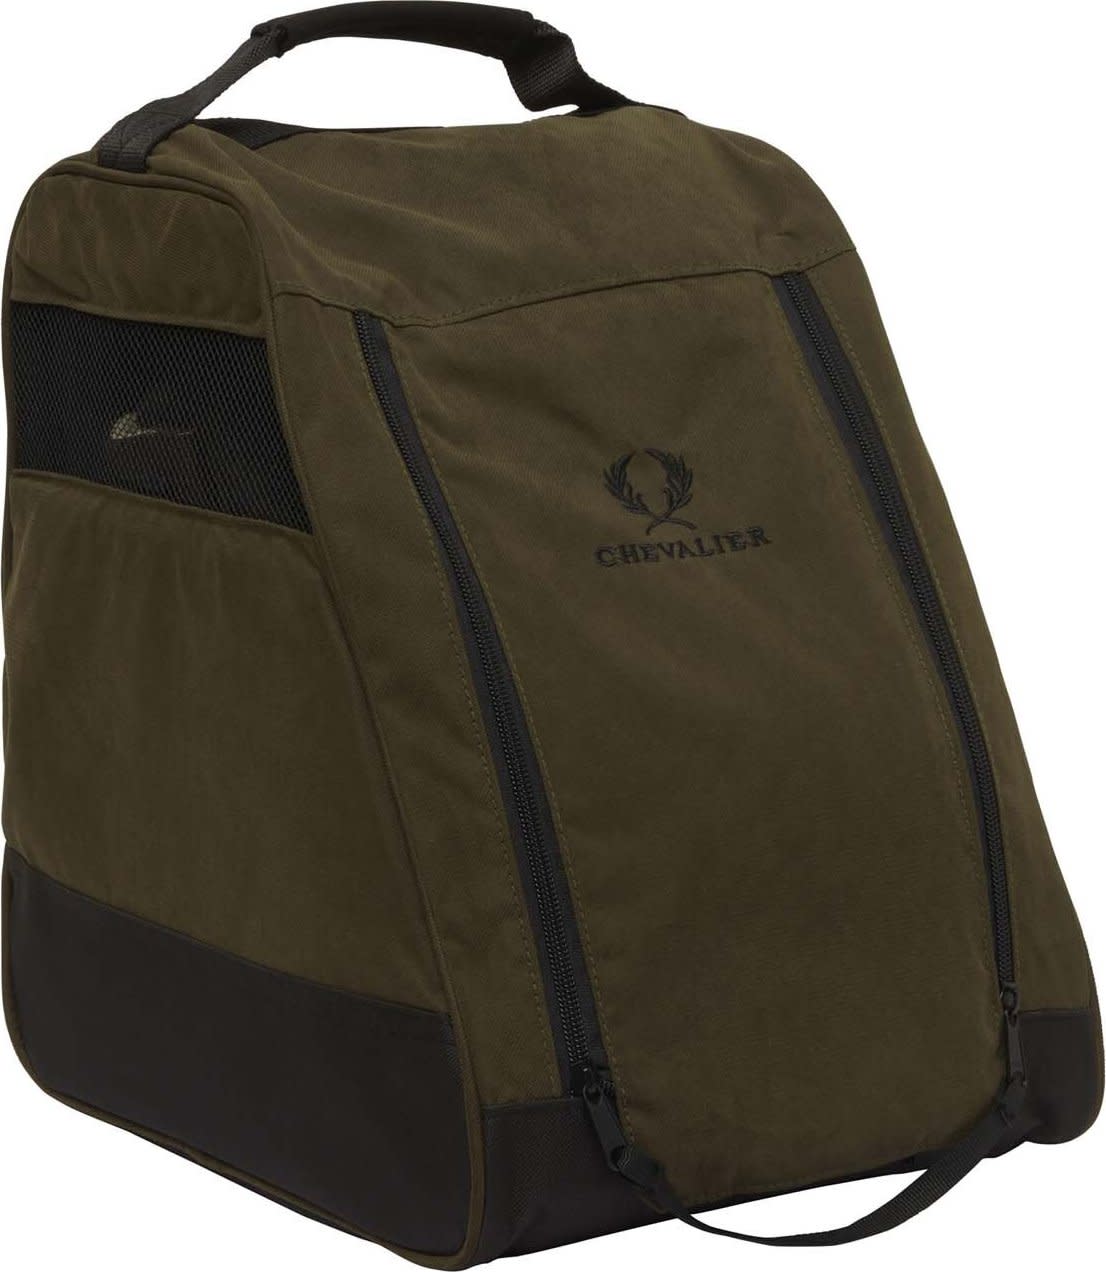 Boot Bag with Ventilation Forest Green